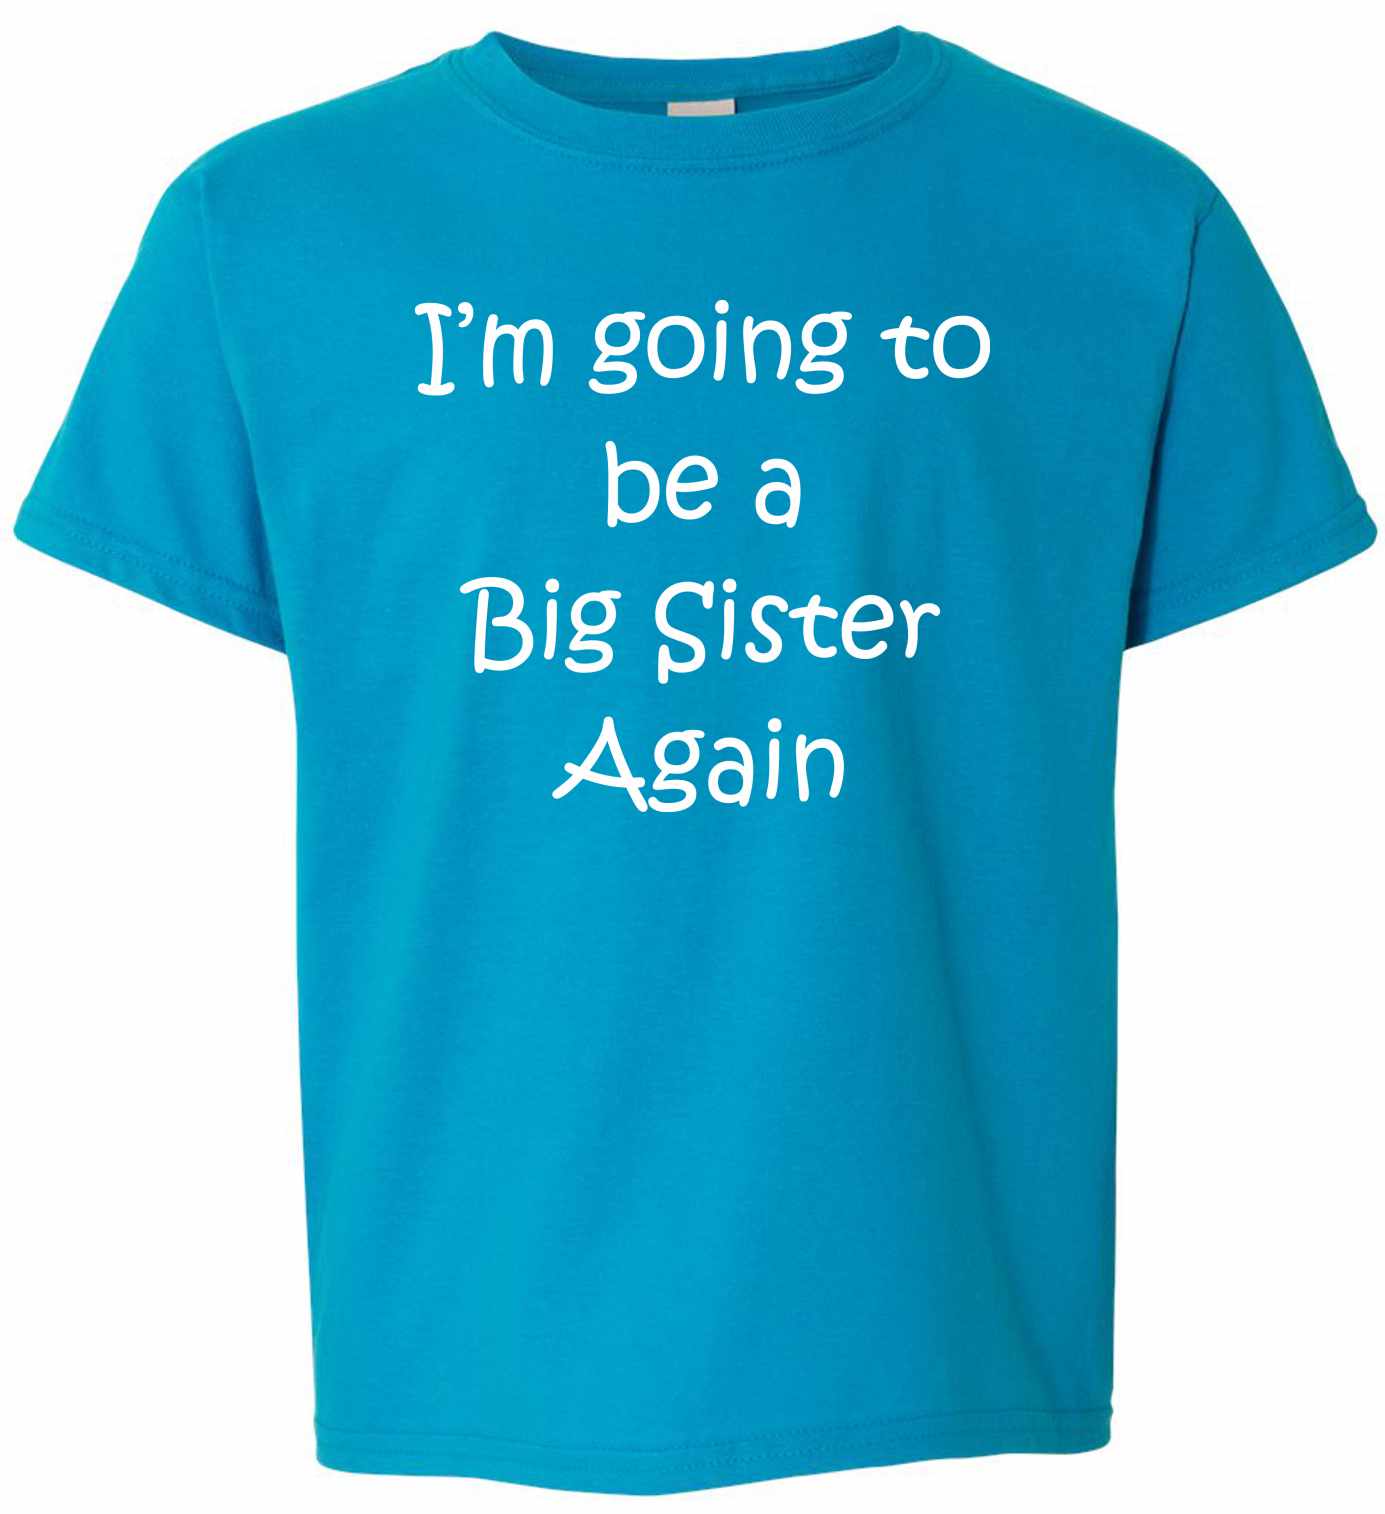 I'm Going to be a Big Sister Again on Kids T-Shirt (#814-201)